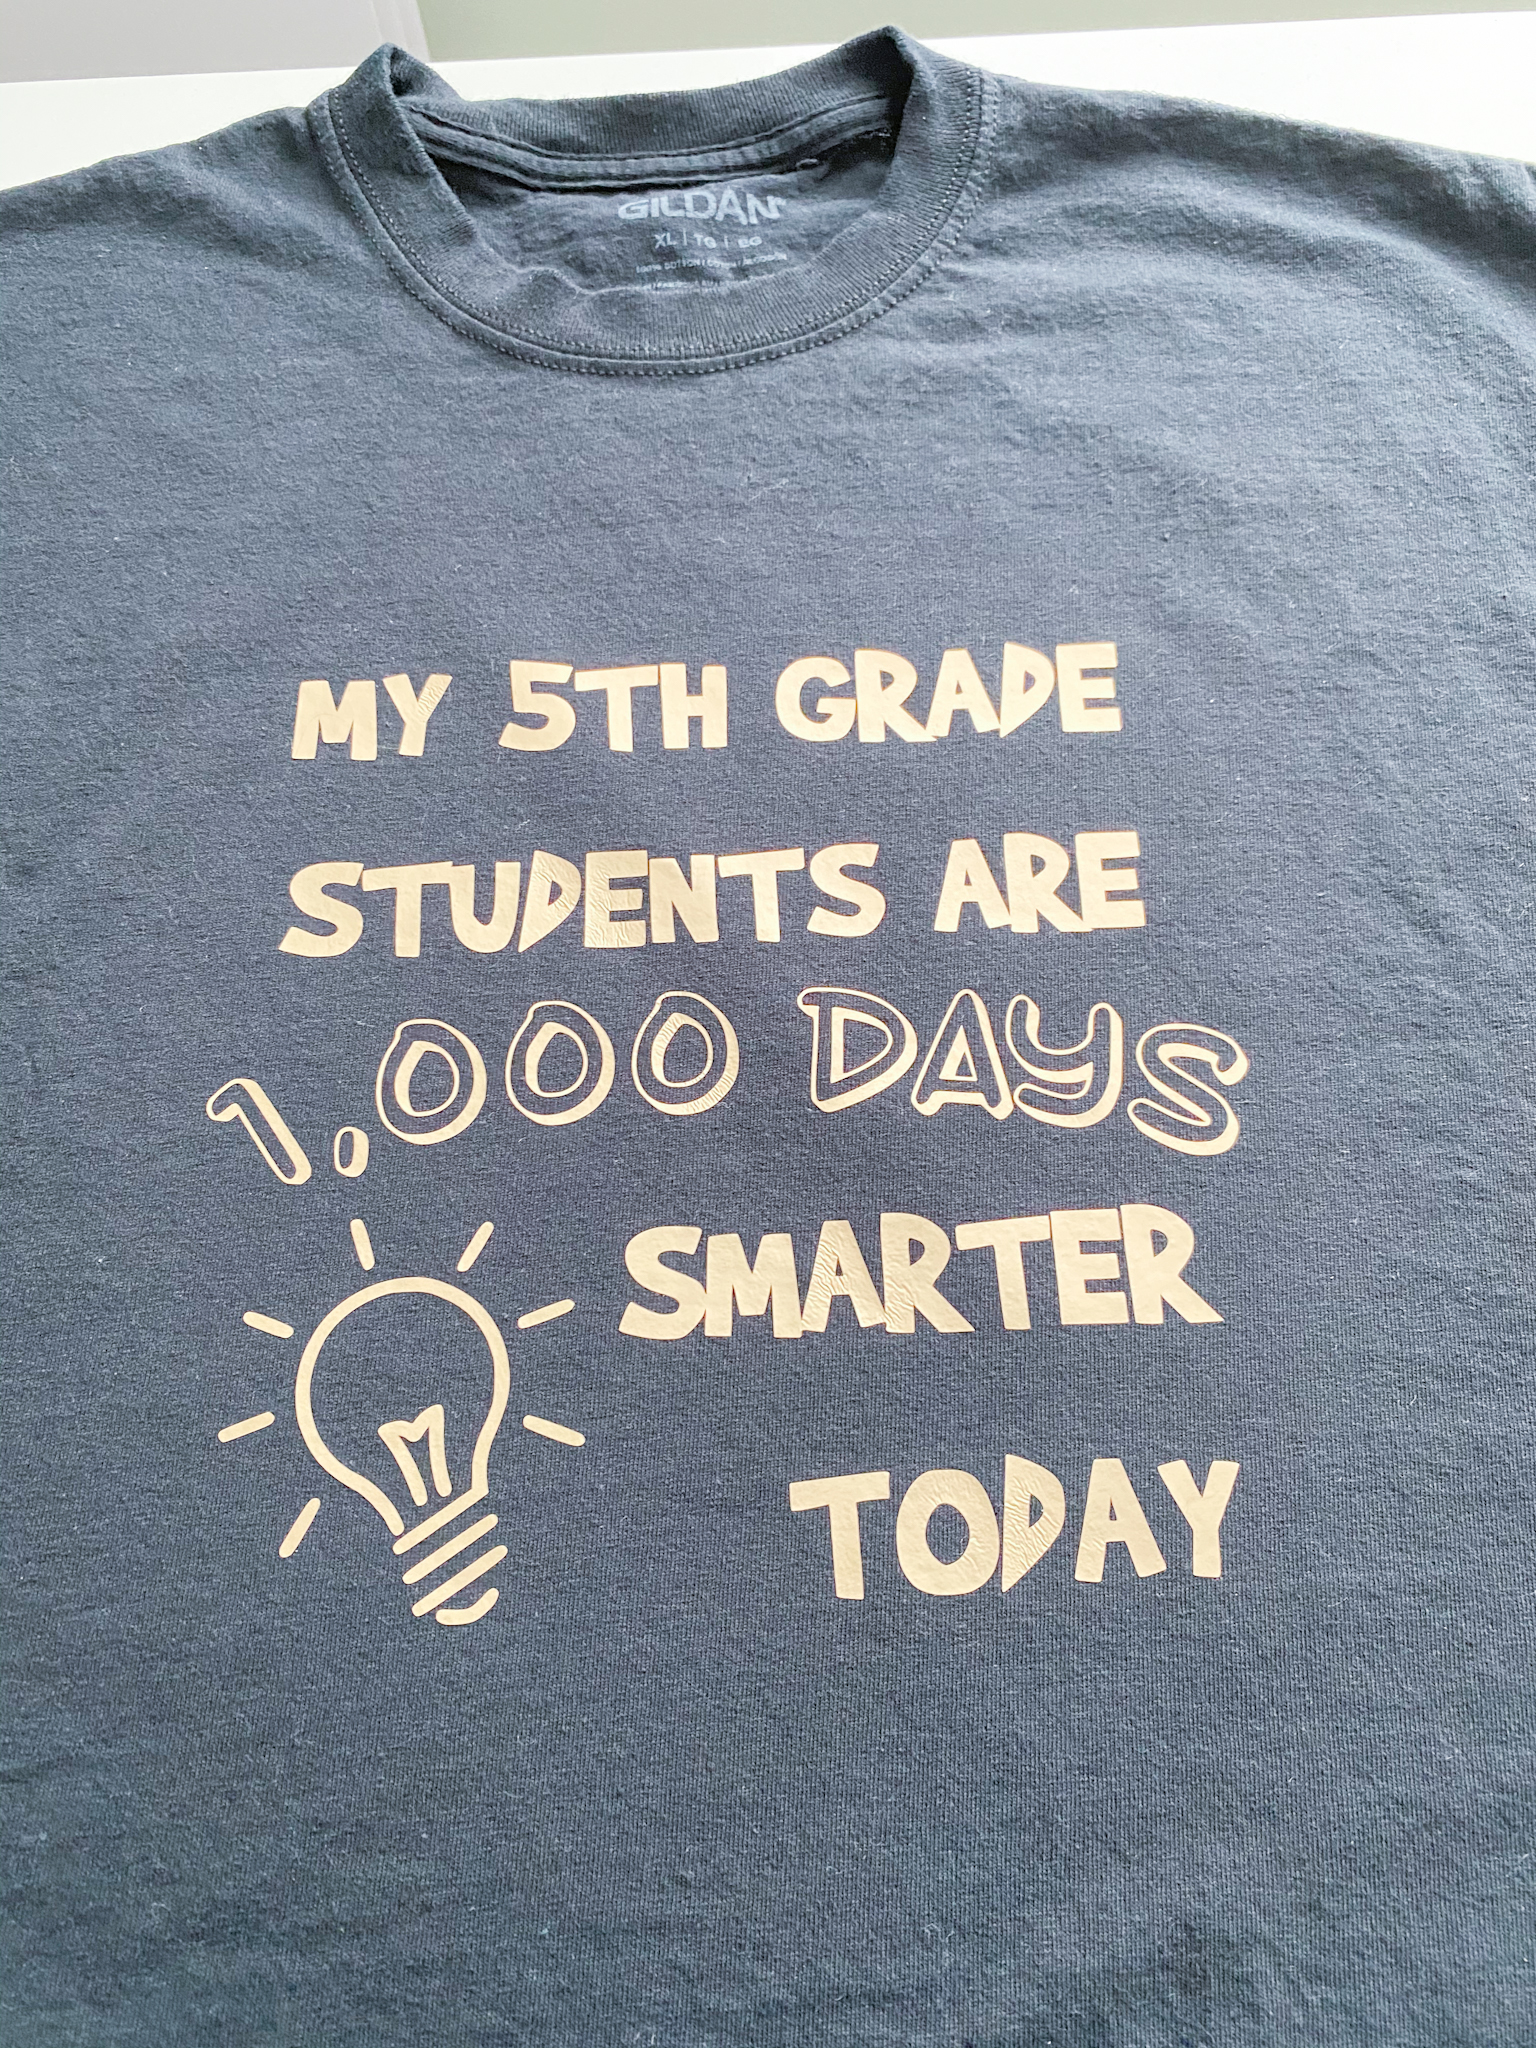 Black t-shirt with gold design reading "My 5th Grade Students are 1,000 Days Smarter Today" with light bulb